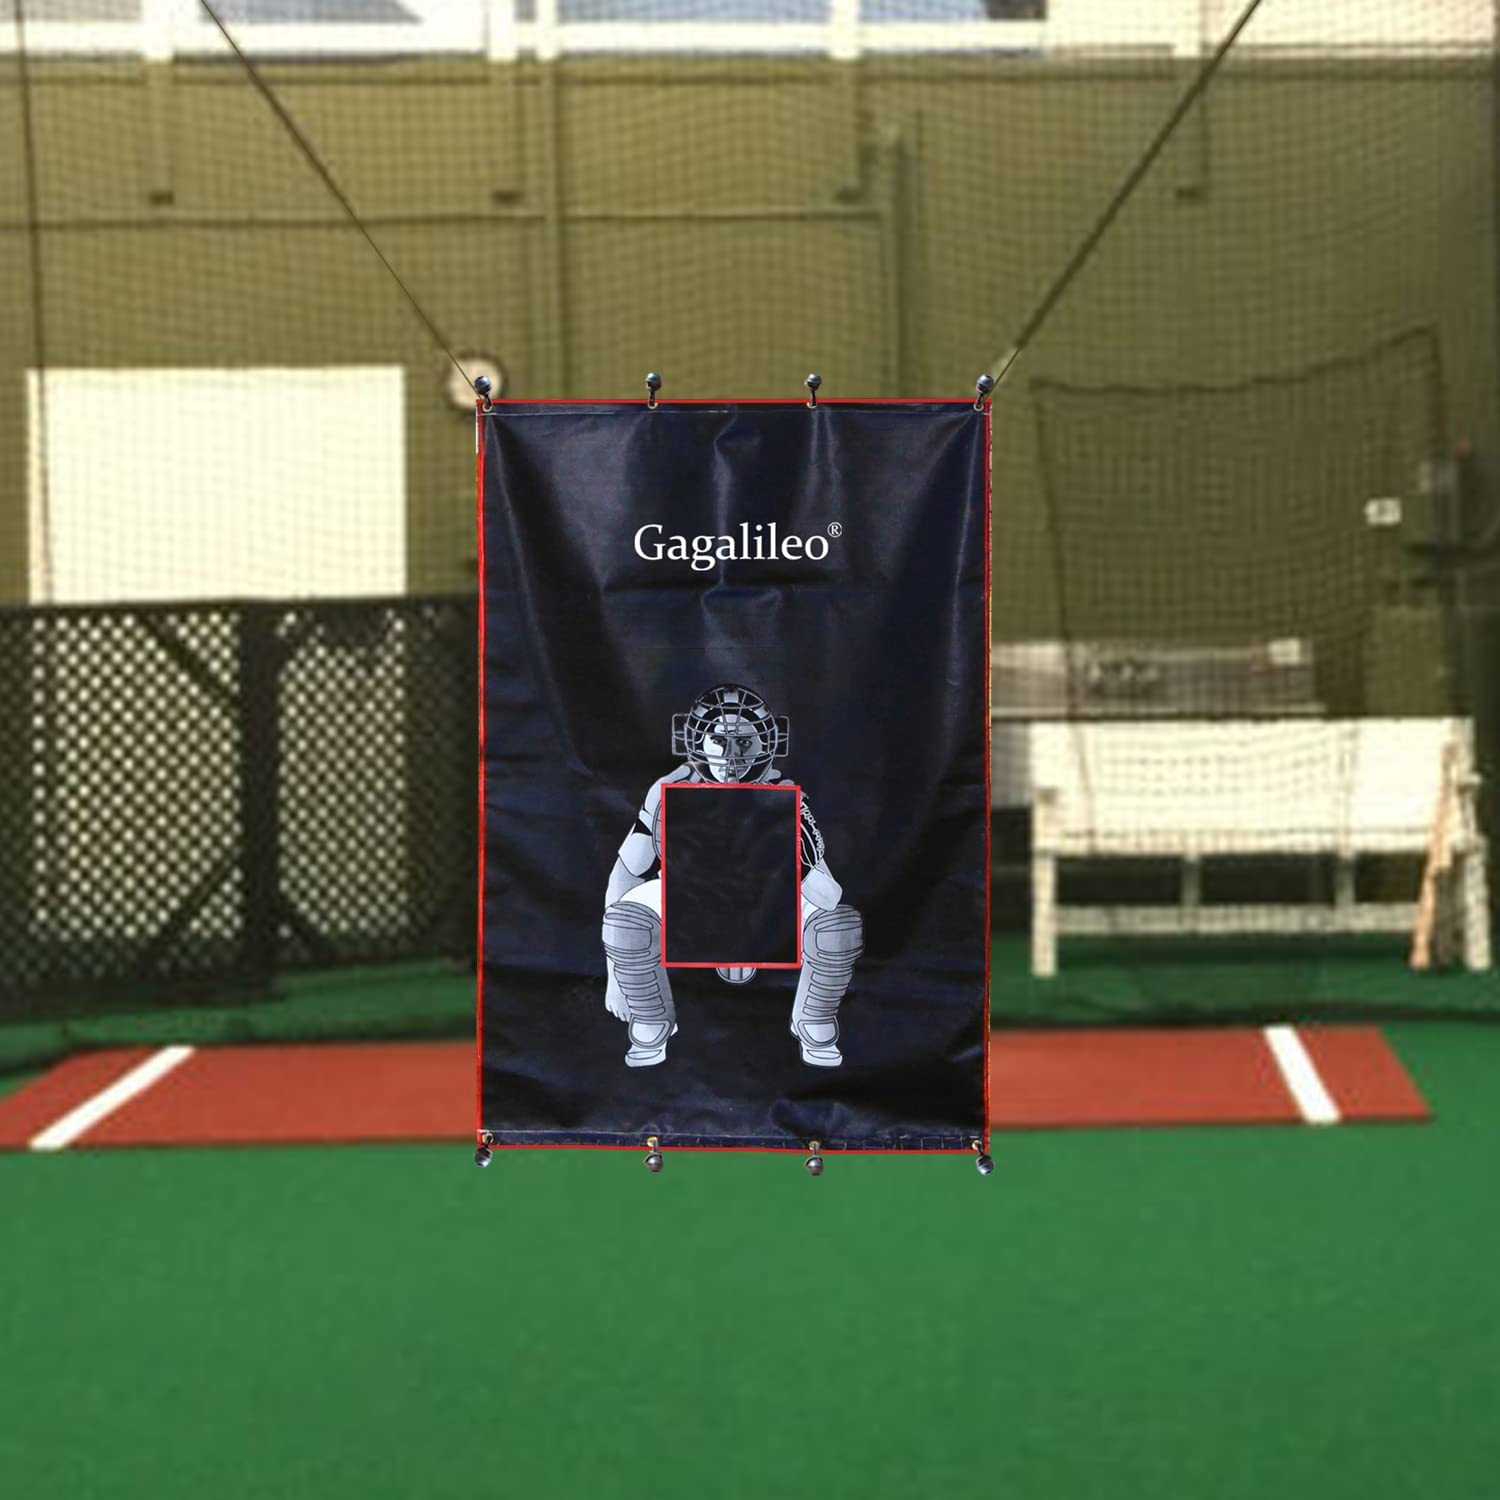 Galileo Softball Backstop Vinyl Heavy Duty Baseball Batting Cage Backstop Pitching Zone Target Trainer Backstop Net Saver with Catcher Image 5X6FT